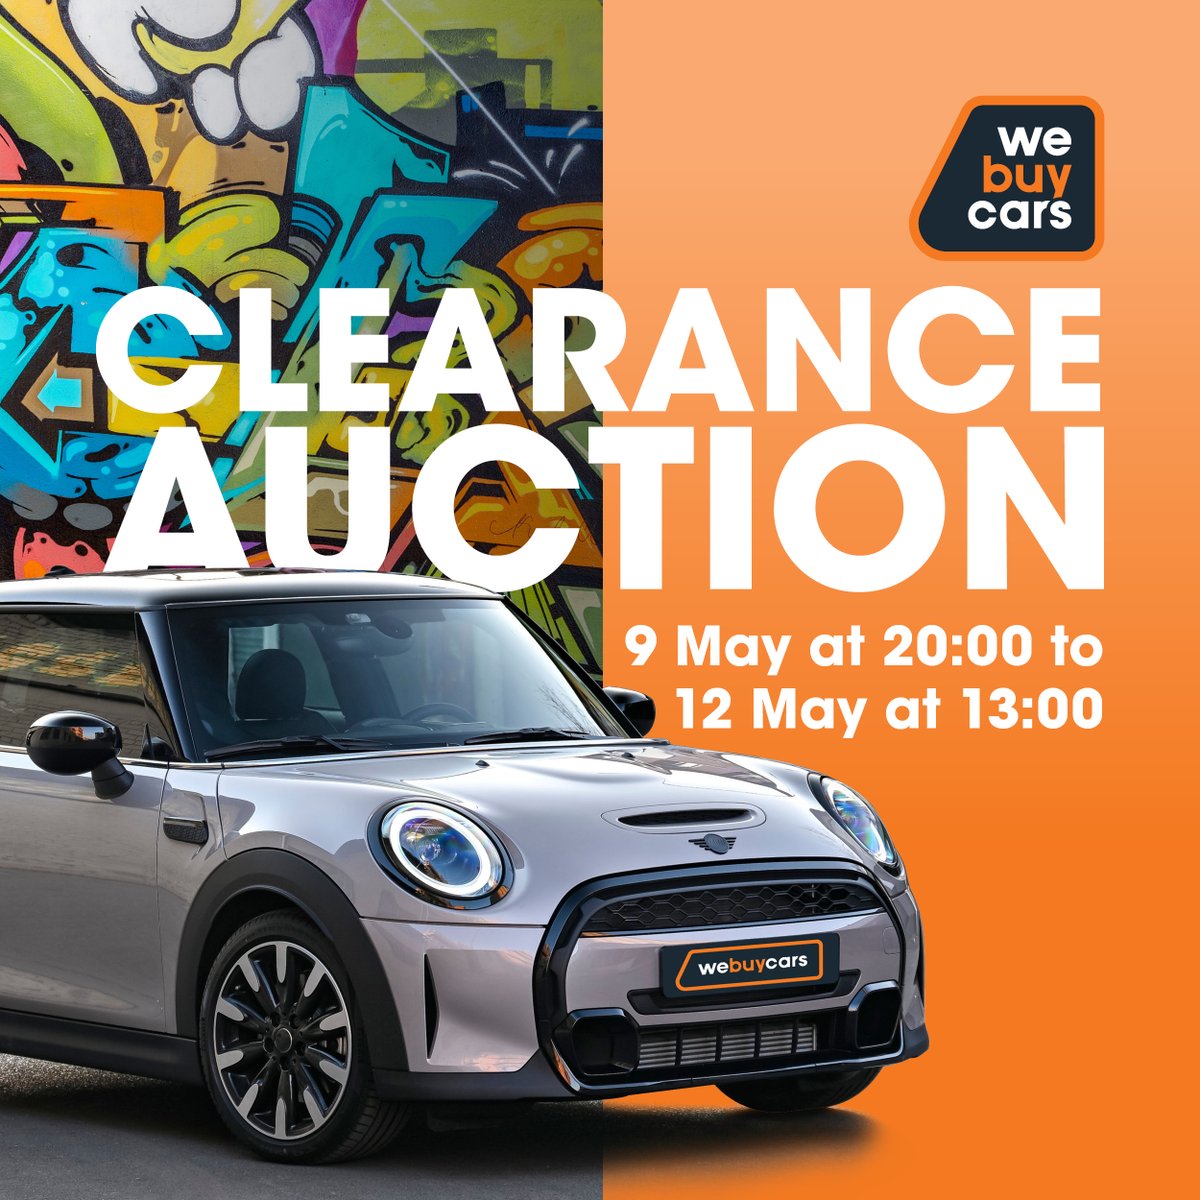 Are you in the mood for massive savings? Bid in the #WeBuyCars Clearance Auction and enjoy discounts on a variety of vehicles! 🚗 #carsforsale #preownedcars #usedcars #usedcarsforsale #carshopping #carfinance #autoauction #carsales #carlifestyle #minicooperlove